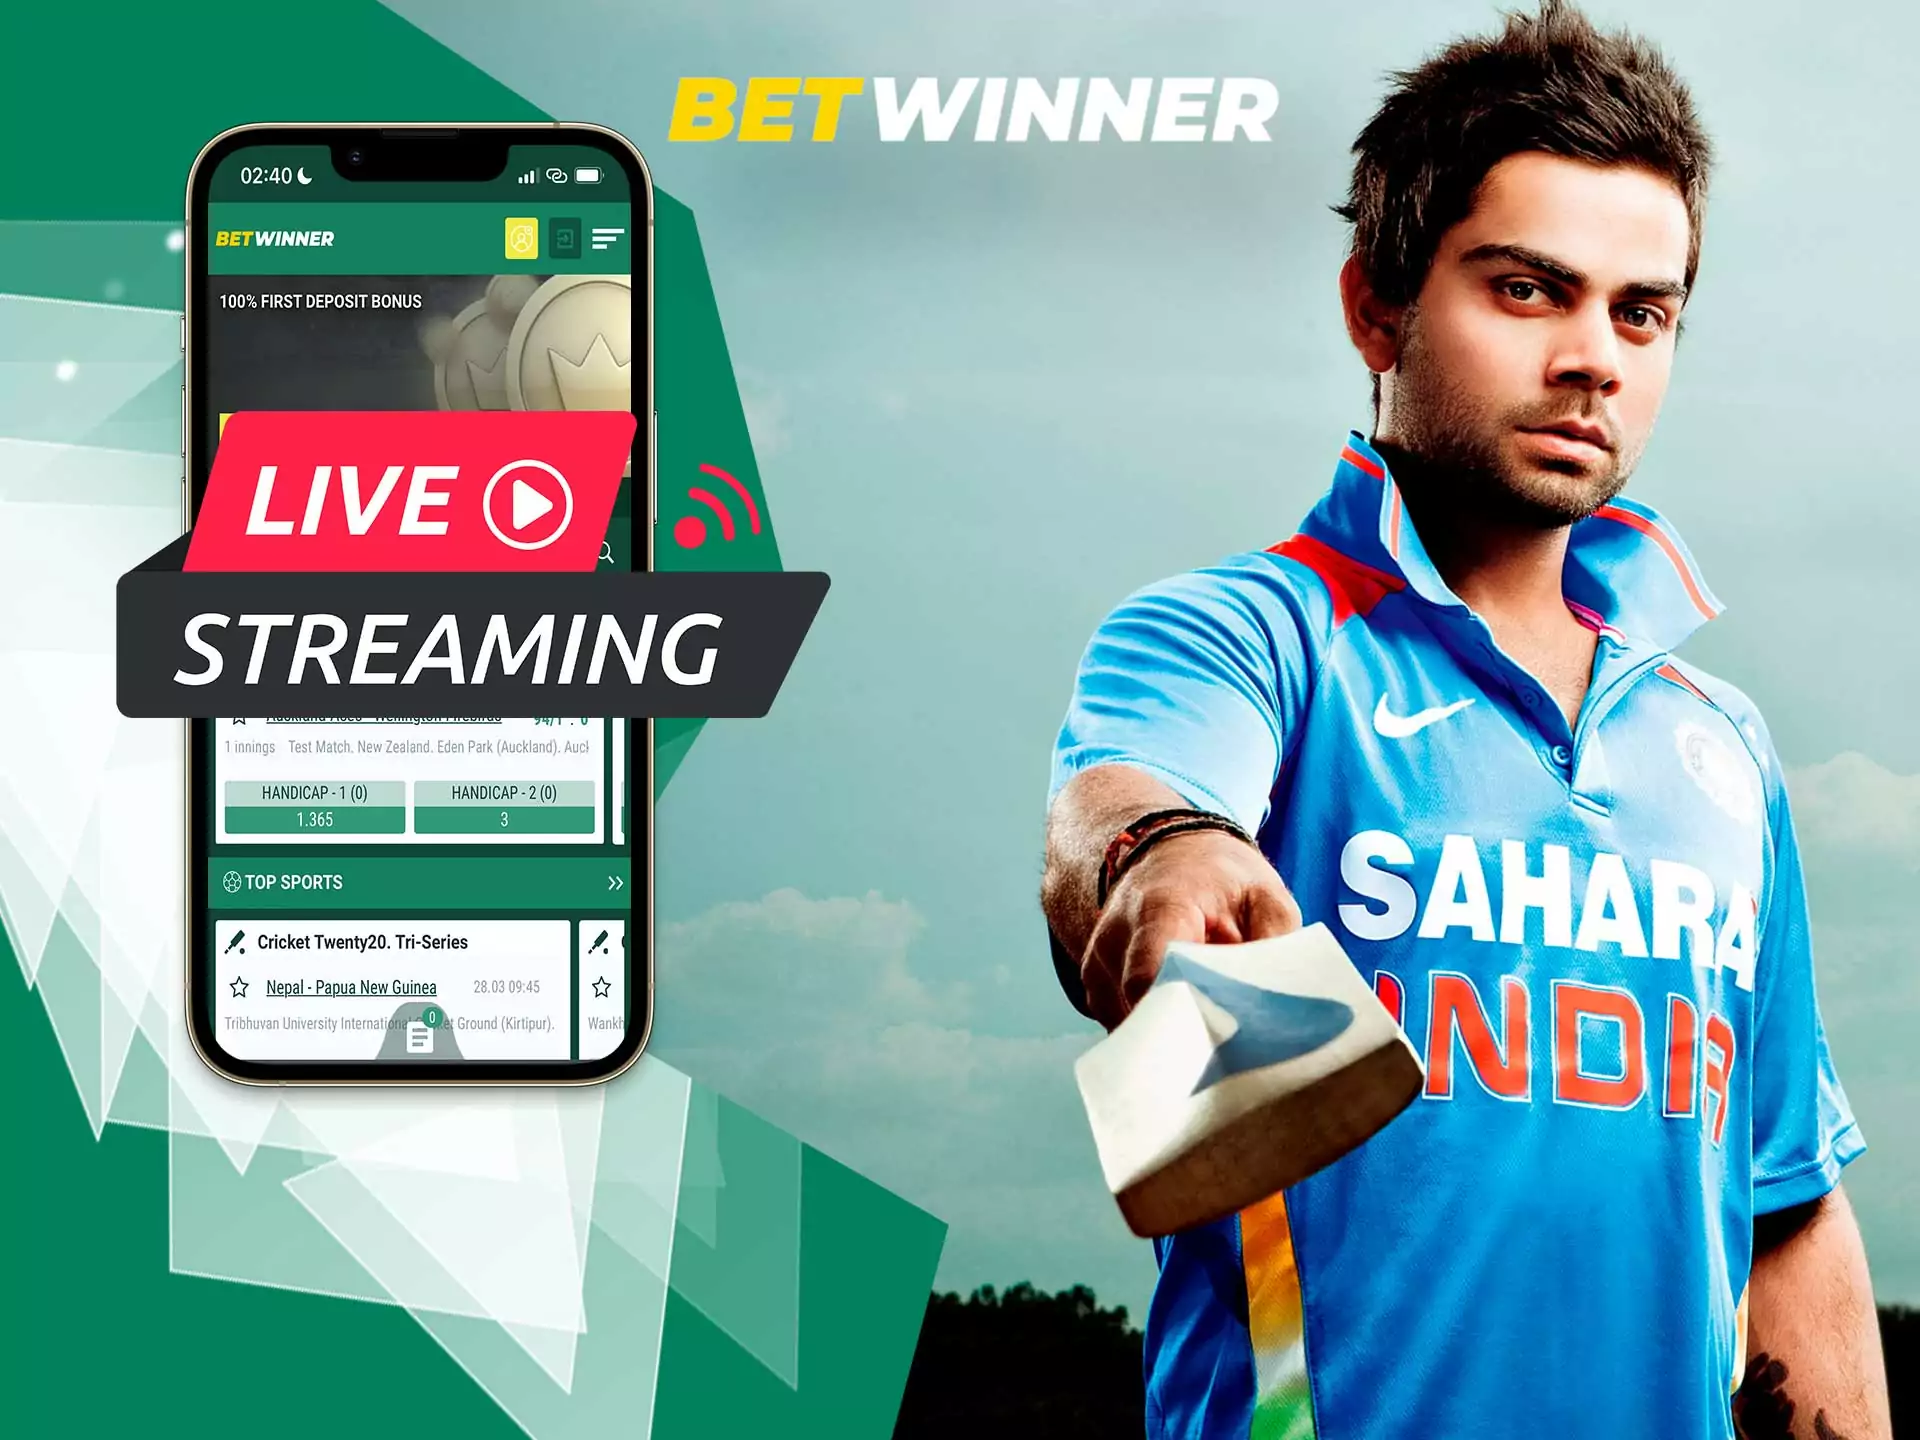 Betwinner is a great opportunity to watch your favorite matches right in the app.